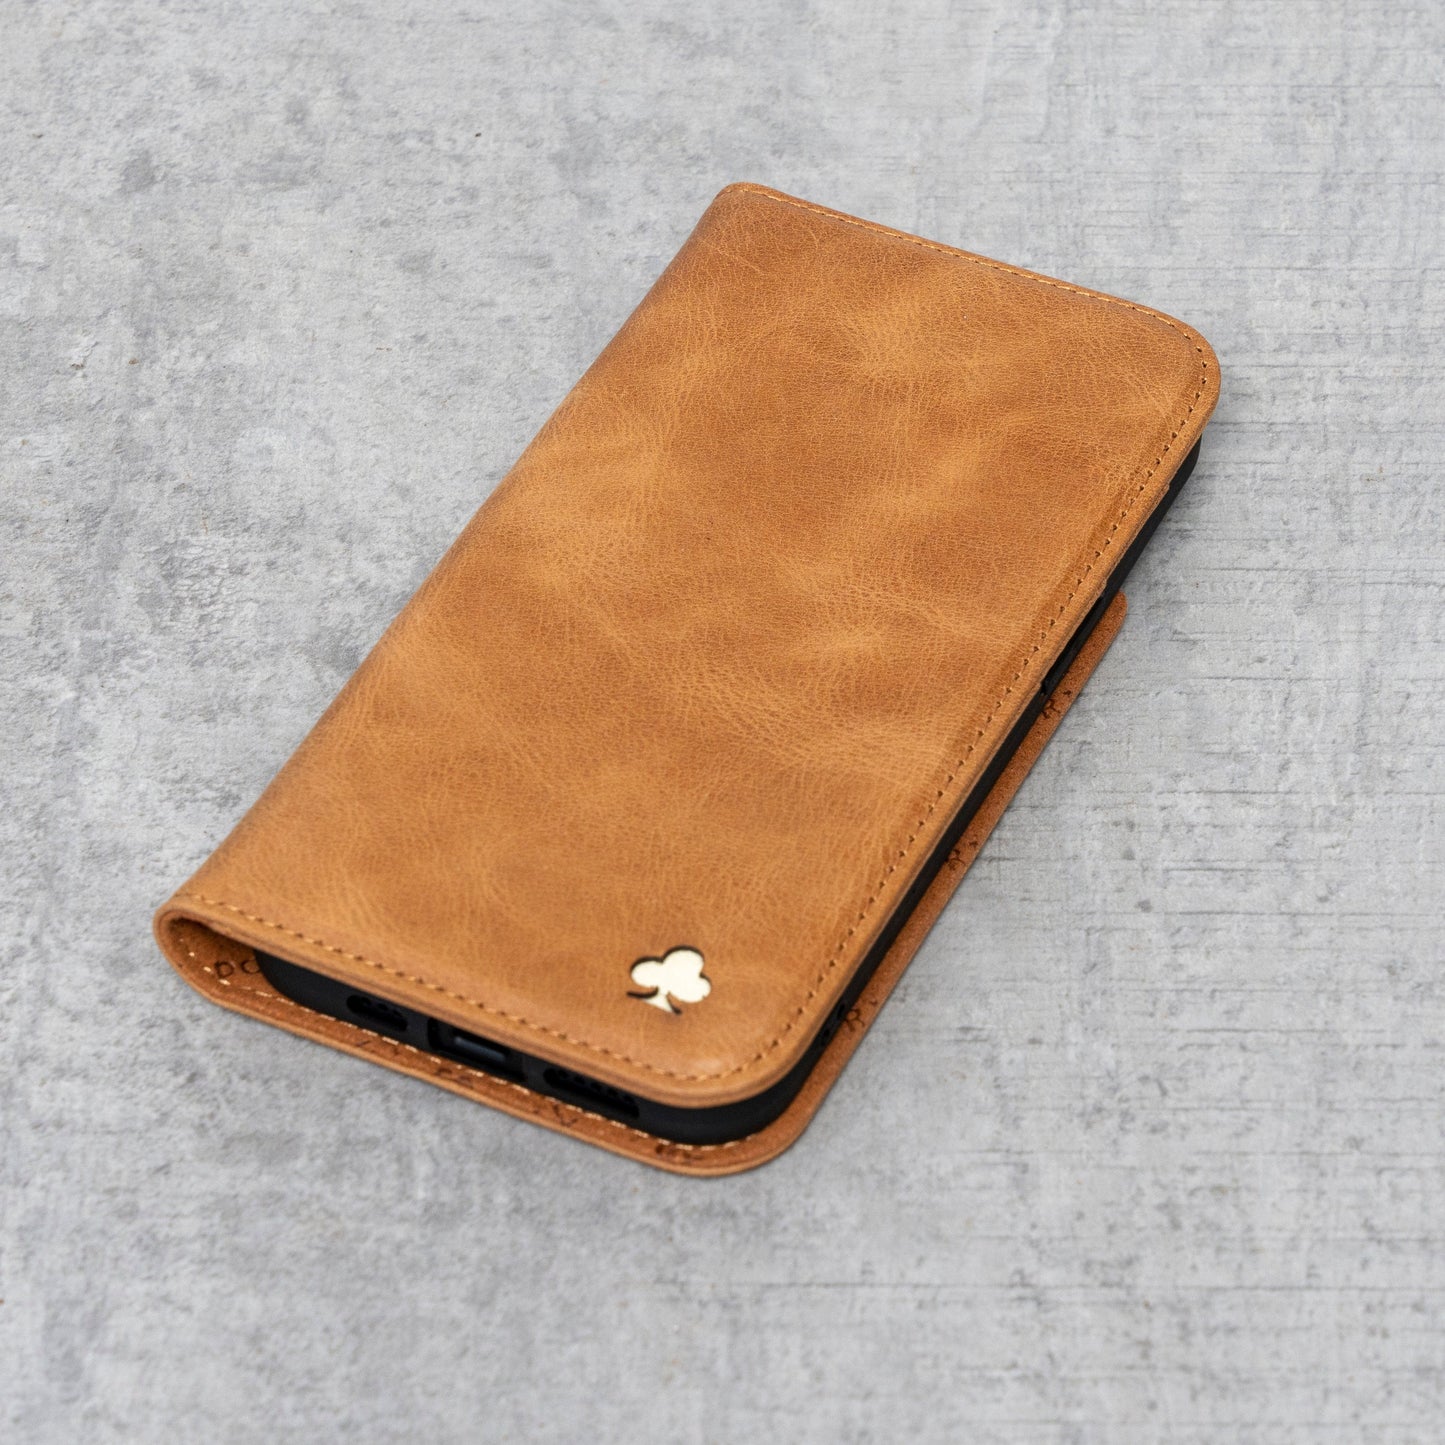 Huawei P20 Pro Leather Case. Premium Slim Genuine Leather Stand Case/Cover/Wallet (Tan)